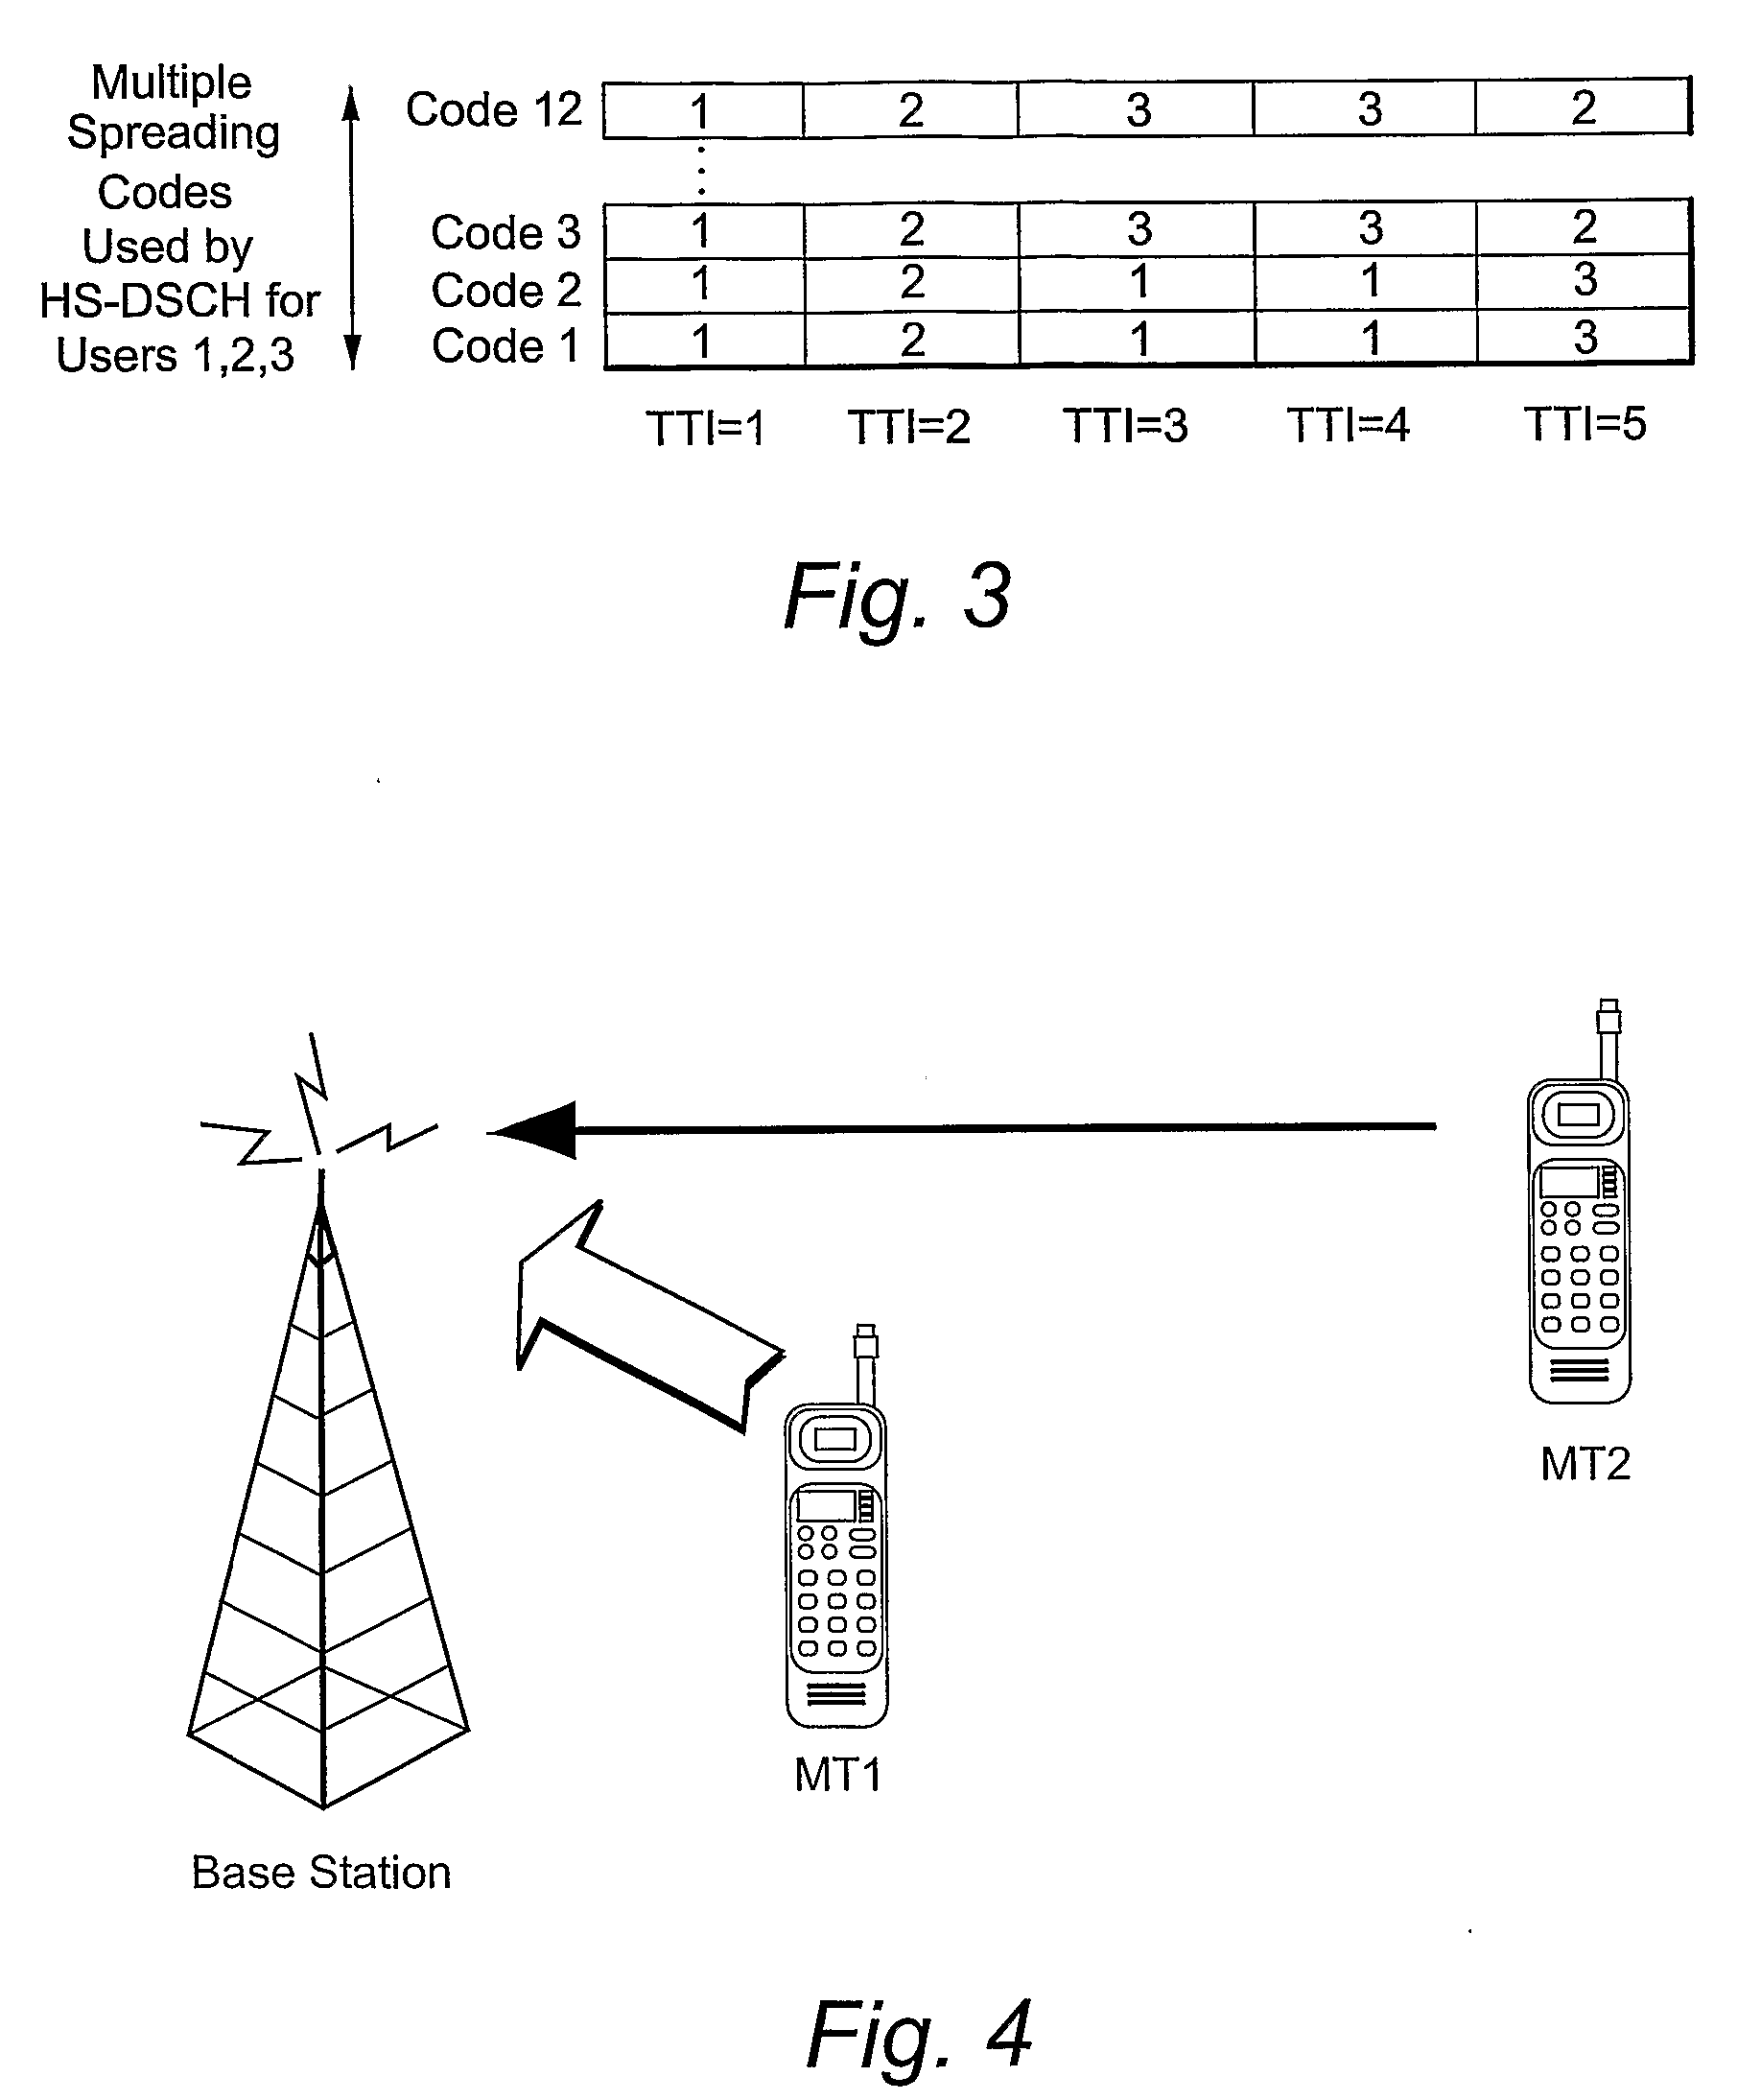 Setting an Uplink Transmission Rate Limit for Mobile Terminals Transmitting Over a High Speed Downlink Shared Channel